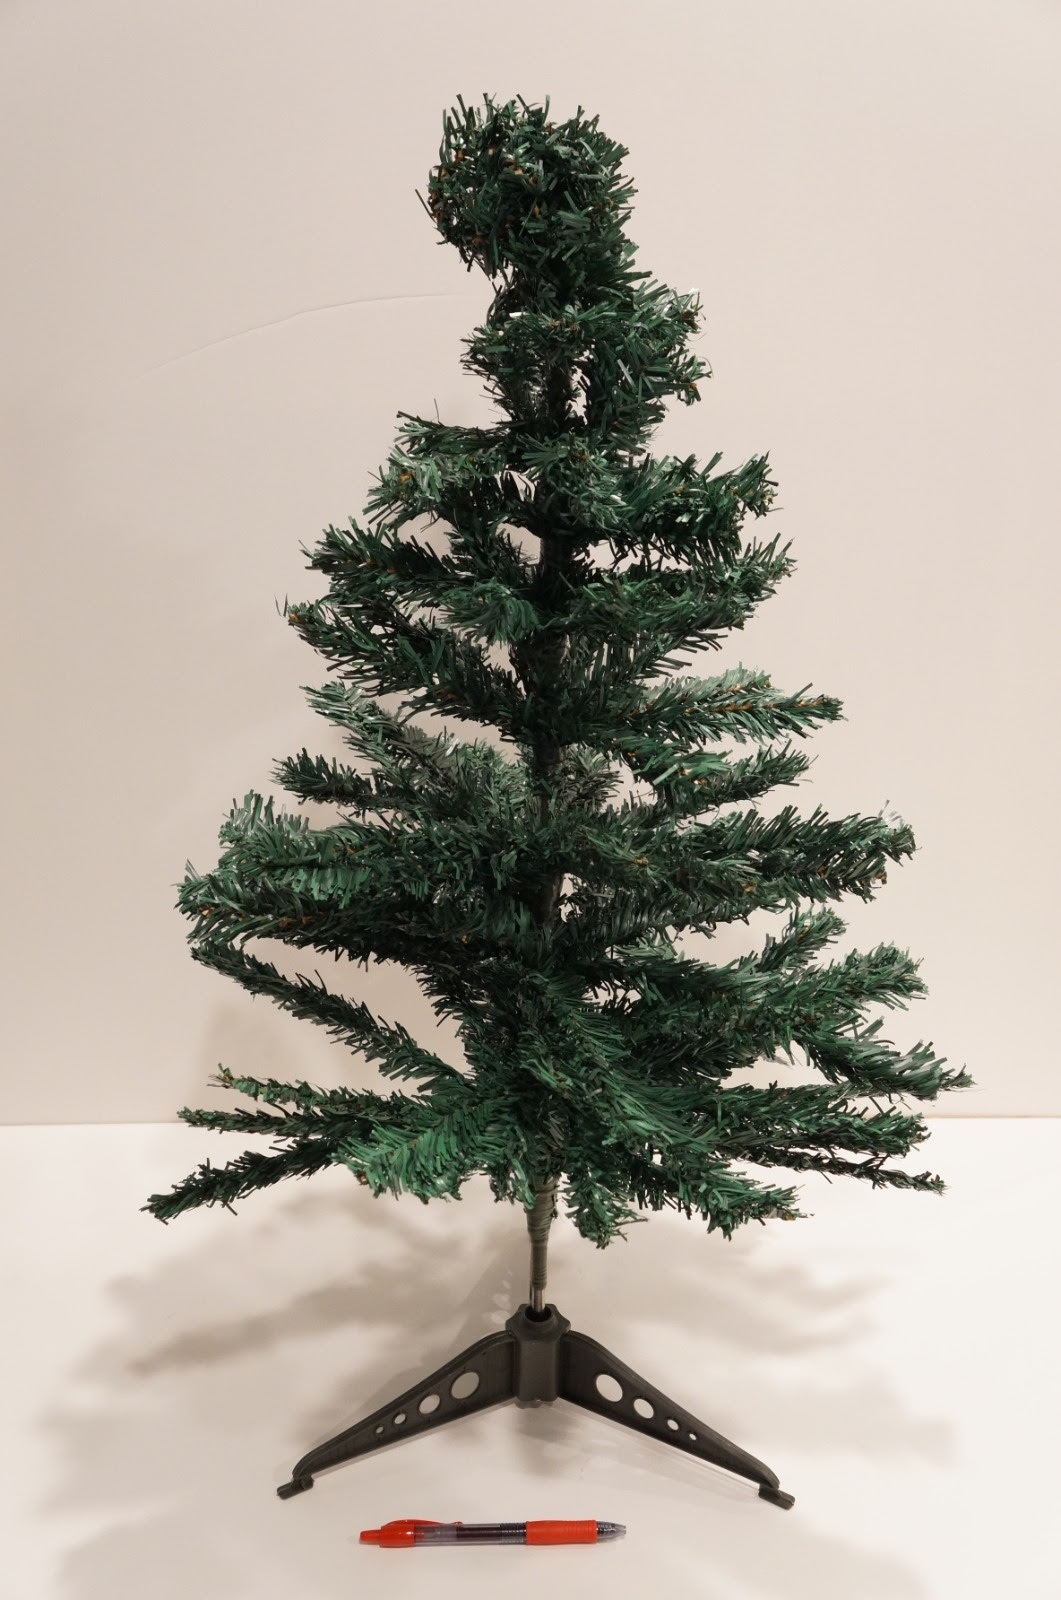 Mini Christmas Tree with Stand - Green Pine Tabletop Tree Undecorated, 35.4 inch. 650 units. EXW Los Angeles $5.75/unit.